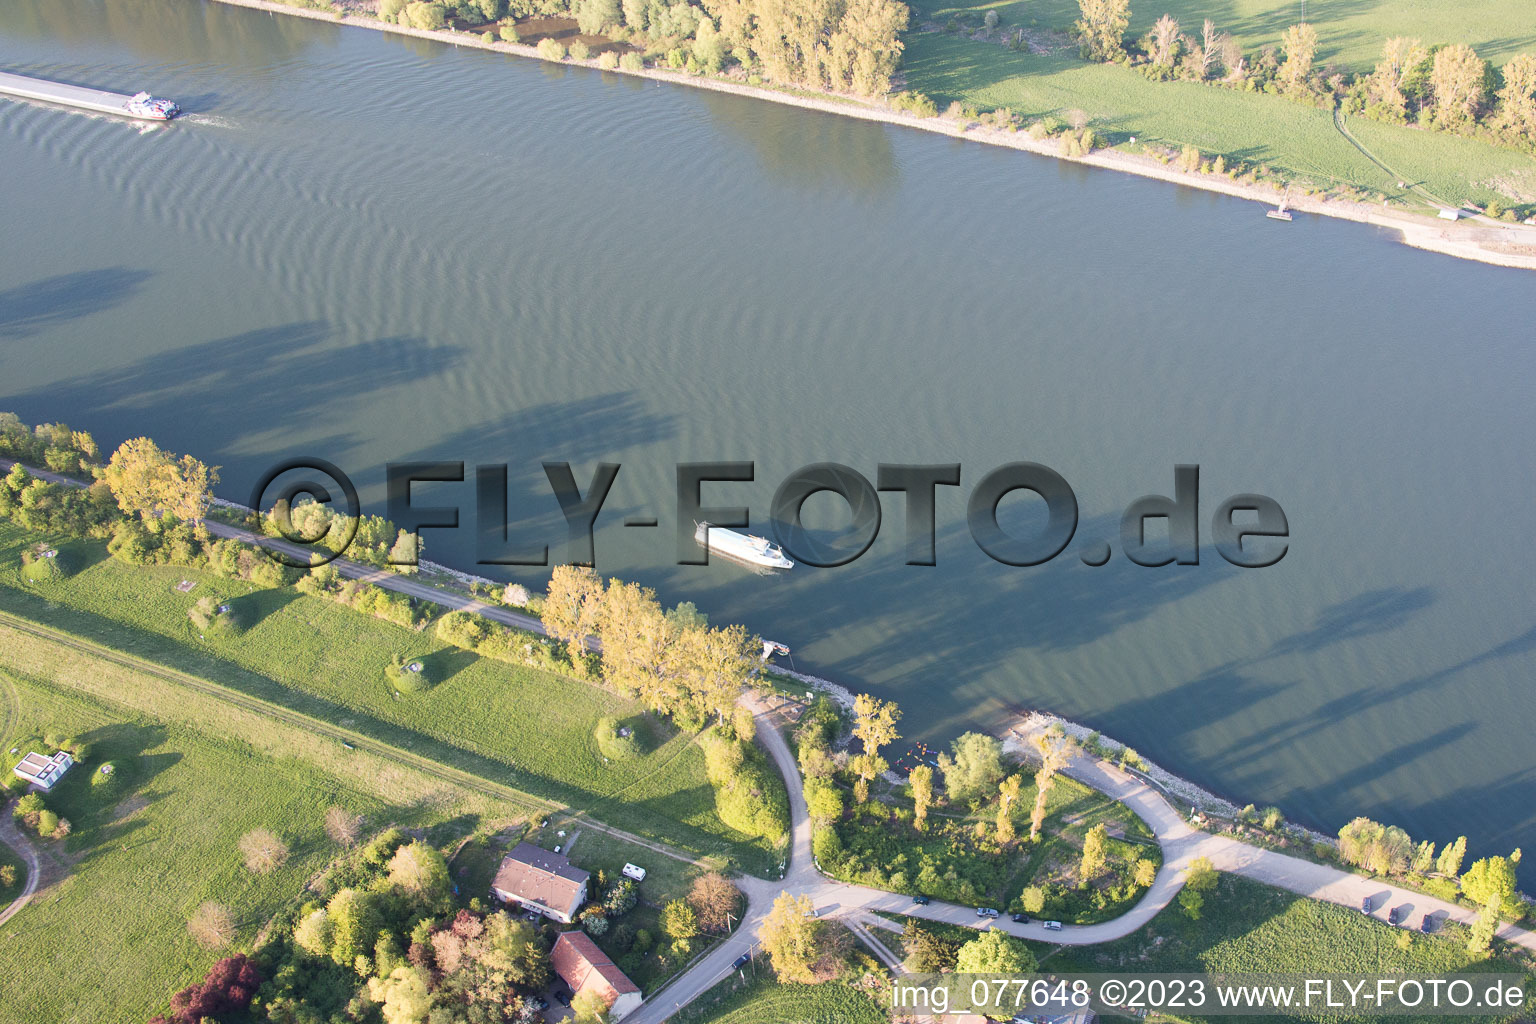 Aerial photograpy of Guntersblum in the state Rhineland-Palatinate, Germany